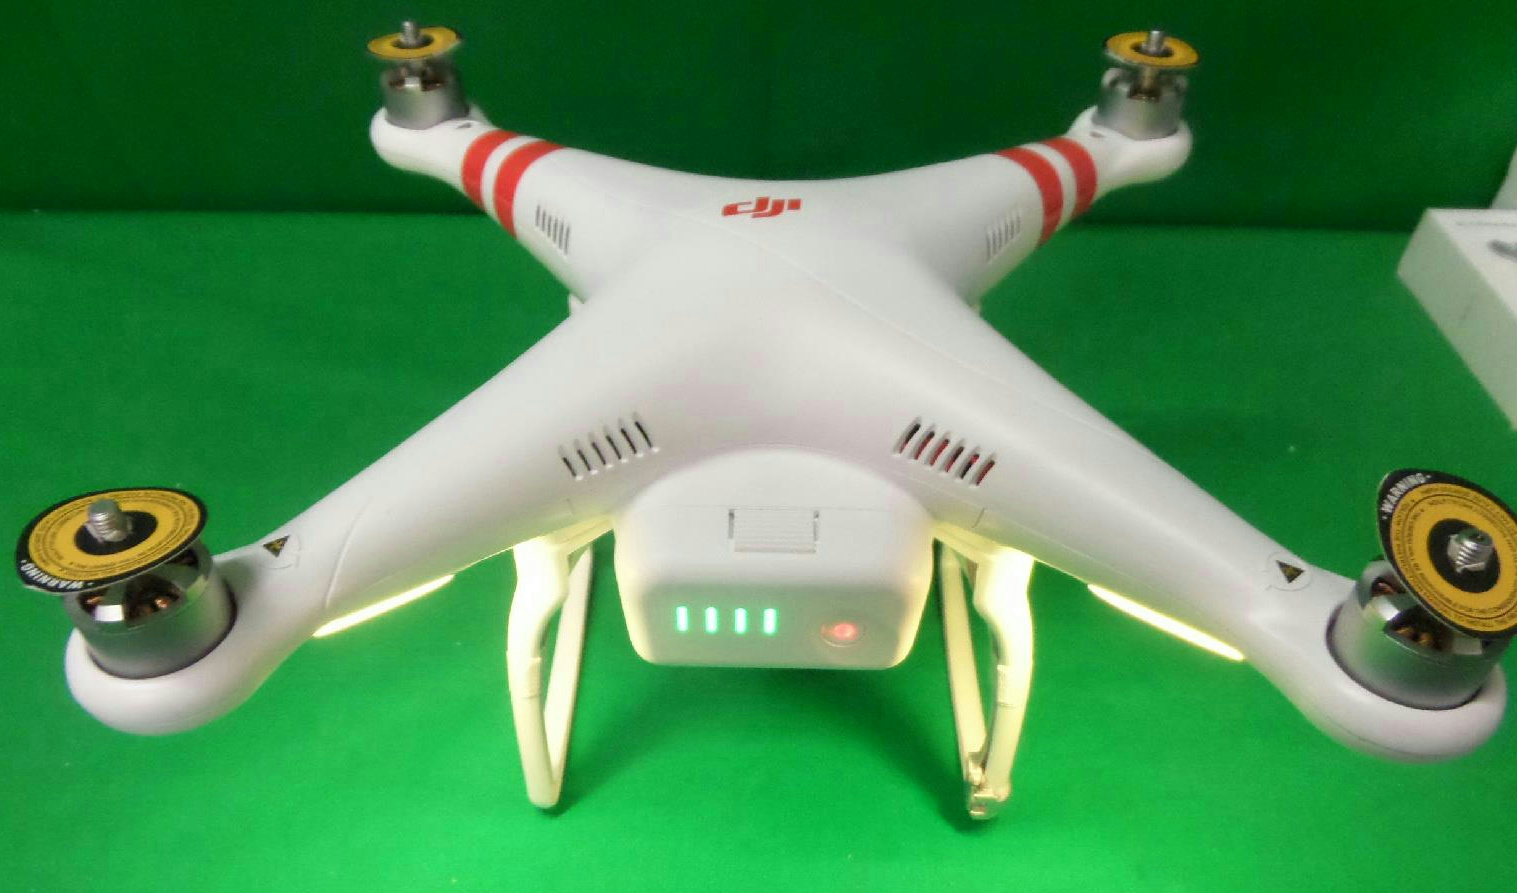 Dji Phantom Vision Quadcopter With Fpv HD Video Camera And Axis